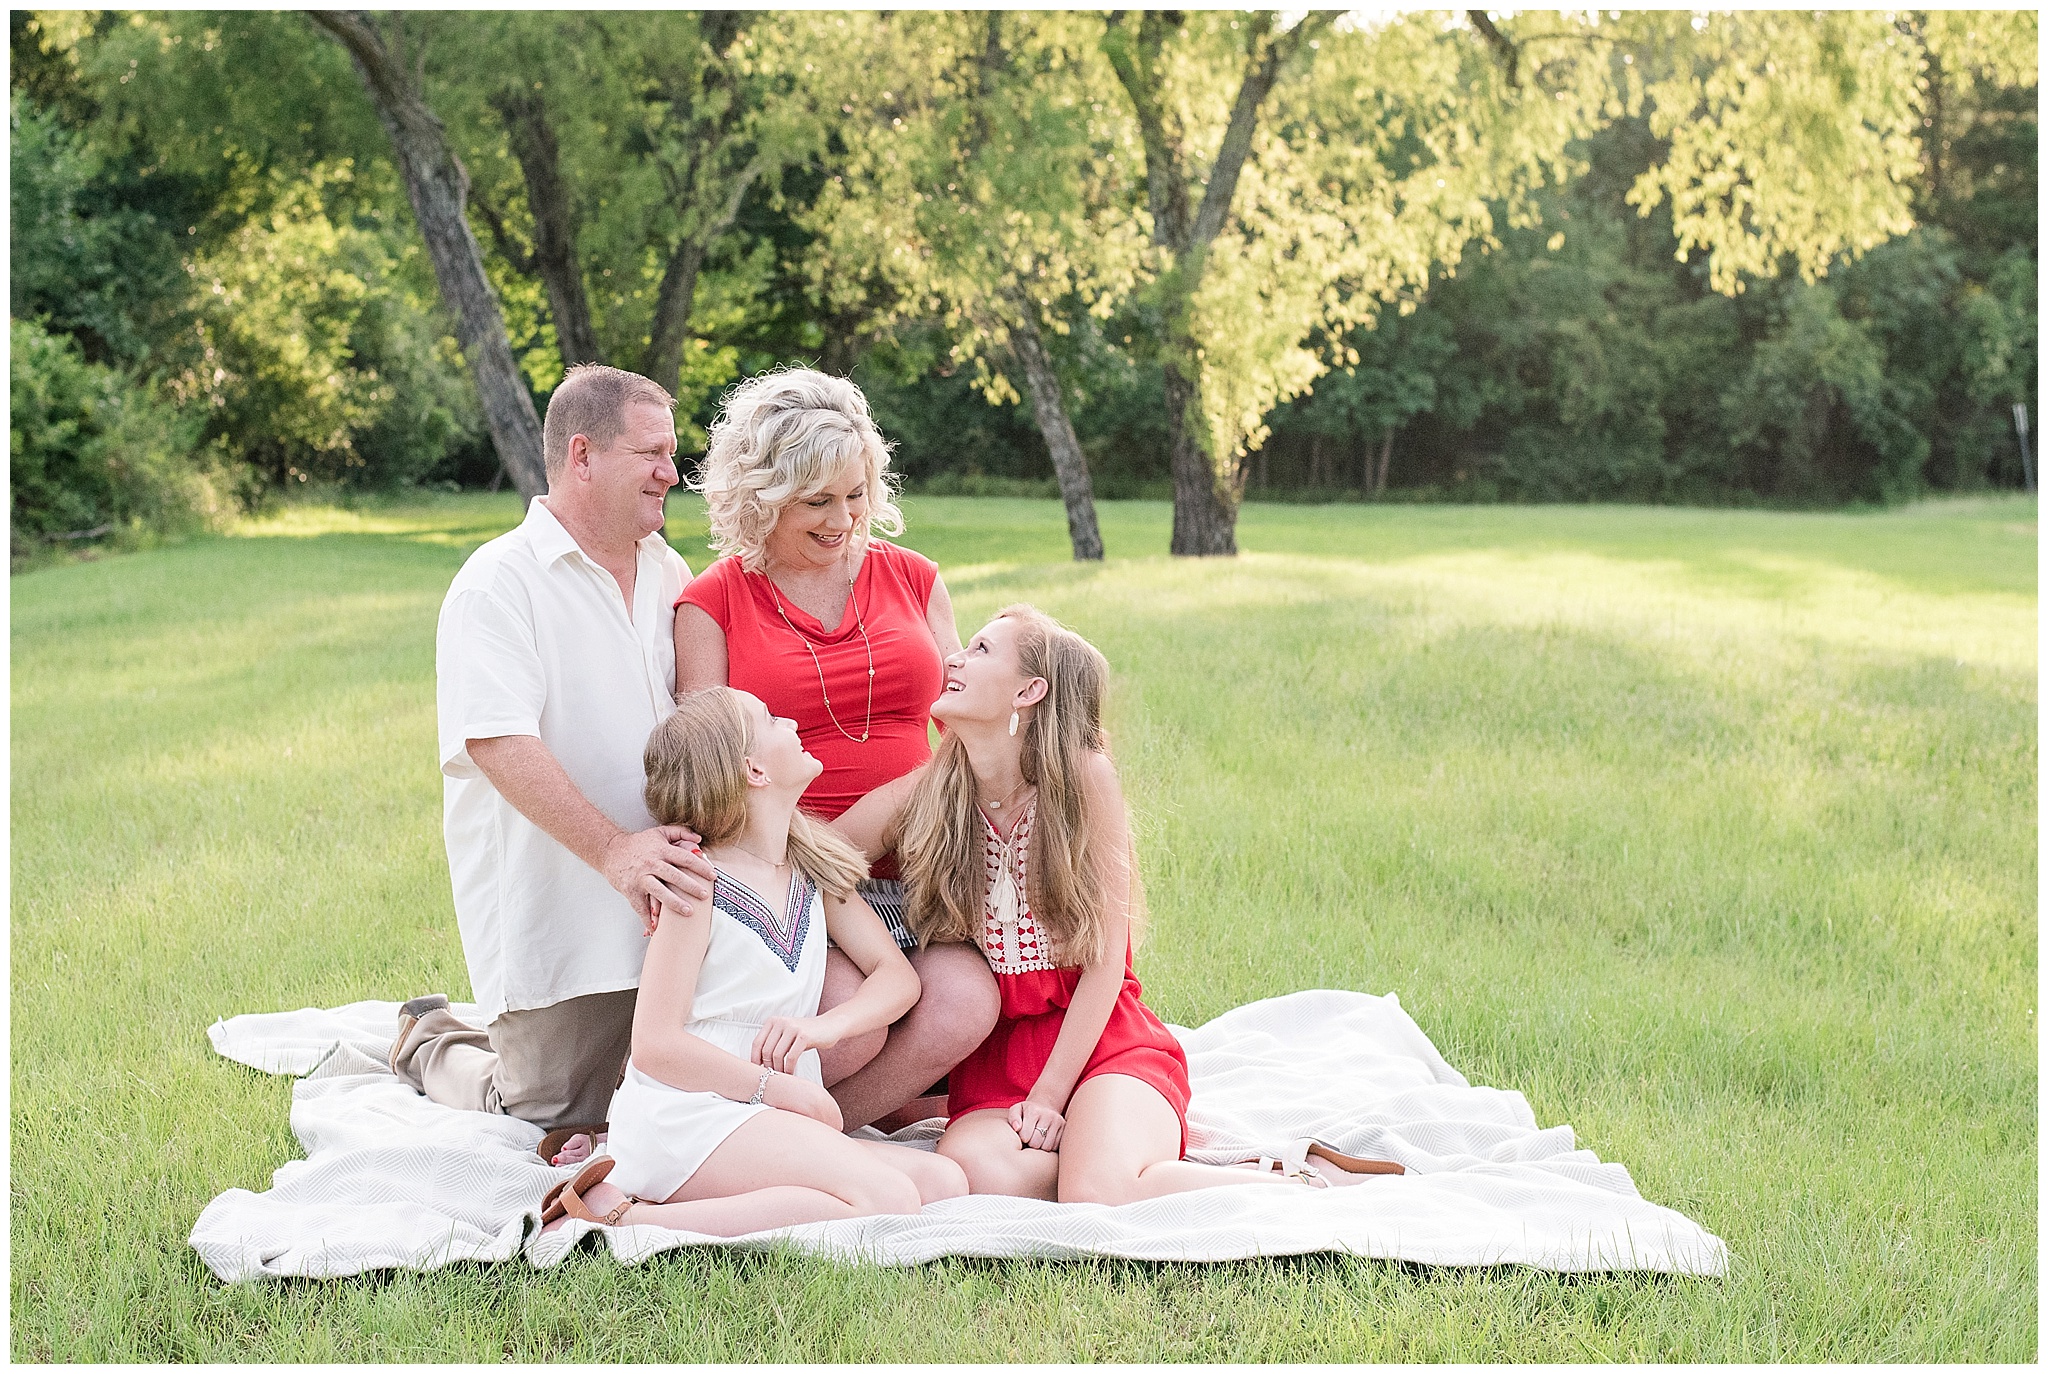 Kingwood family portrait photographer maternity session with family of four